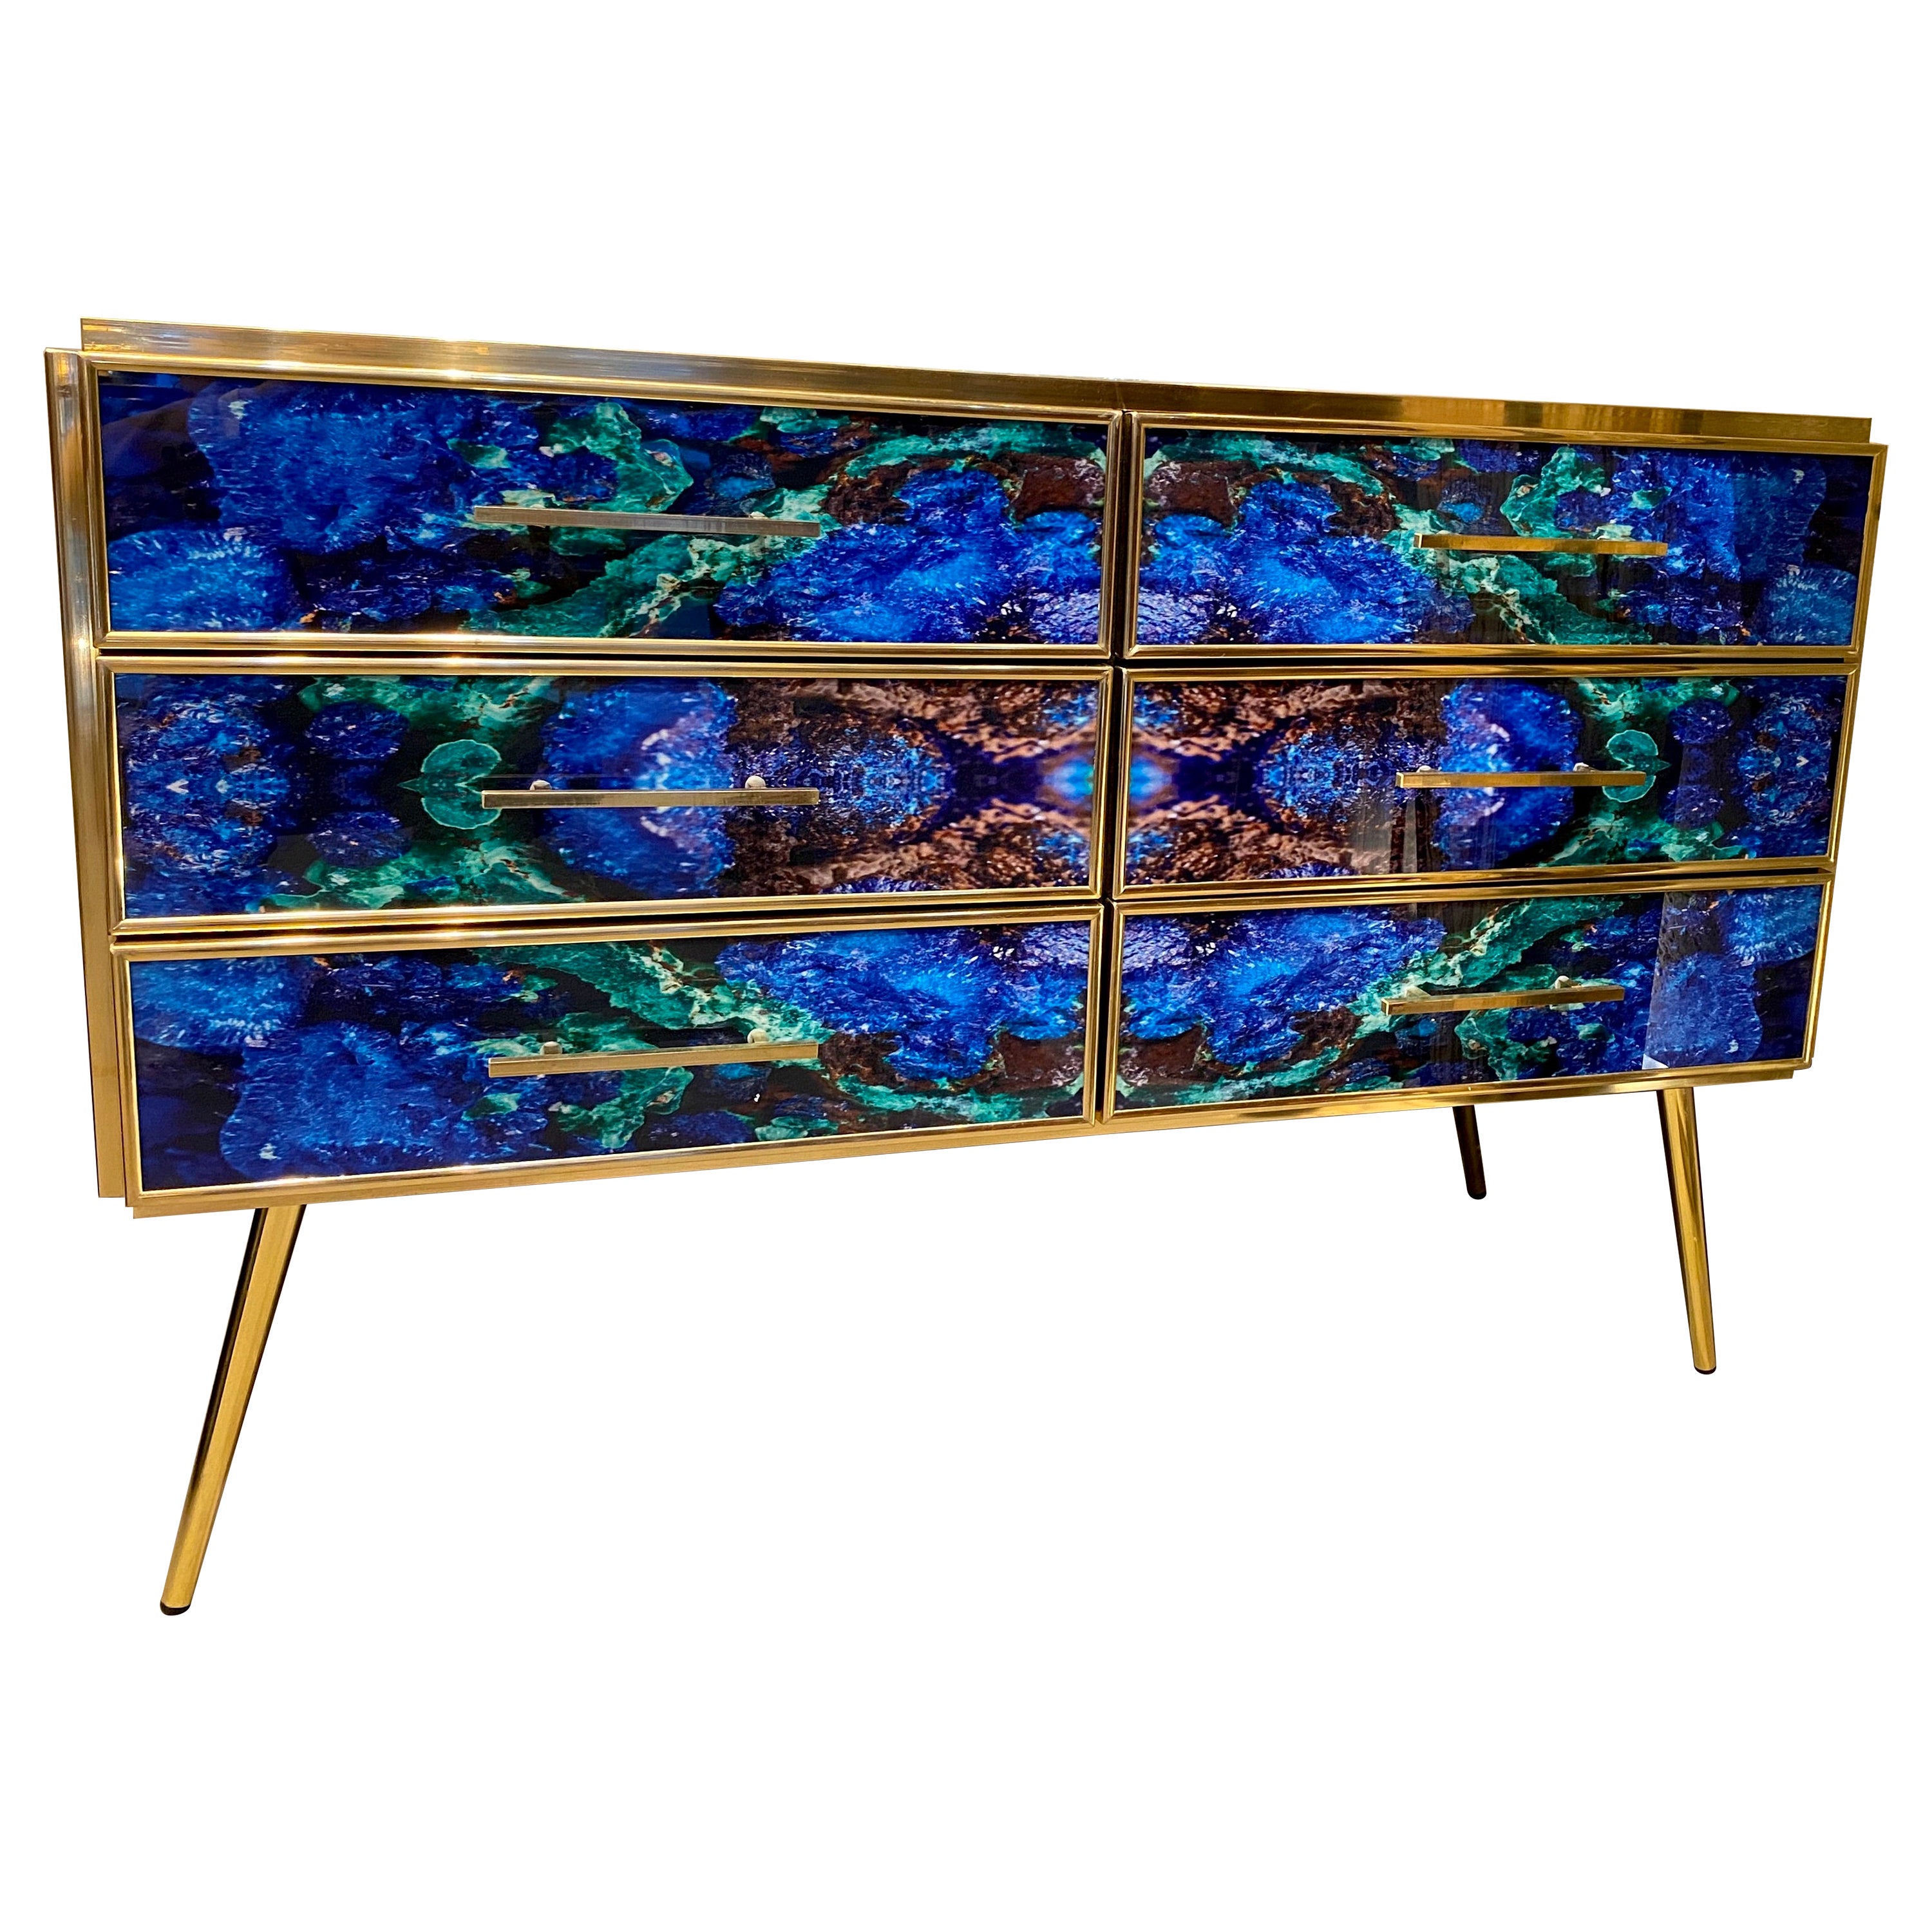 Striking brass frame and handcut Lapis lazuli imitation Murano glass Commode or chest of drawer, raised on special brass legs. 
Handmade by a master artisan.
Price is for one item. 